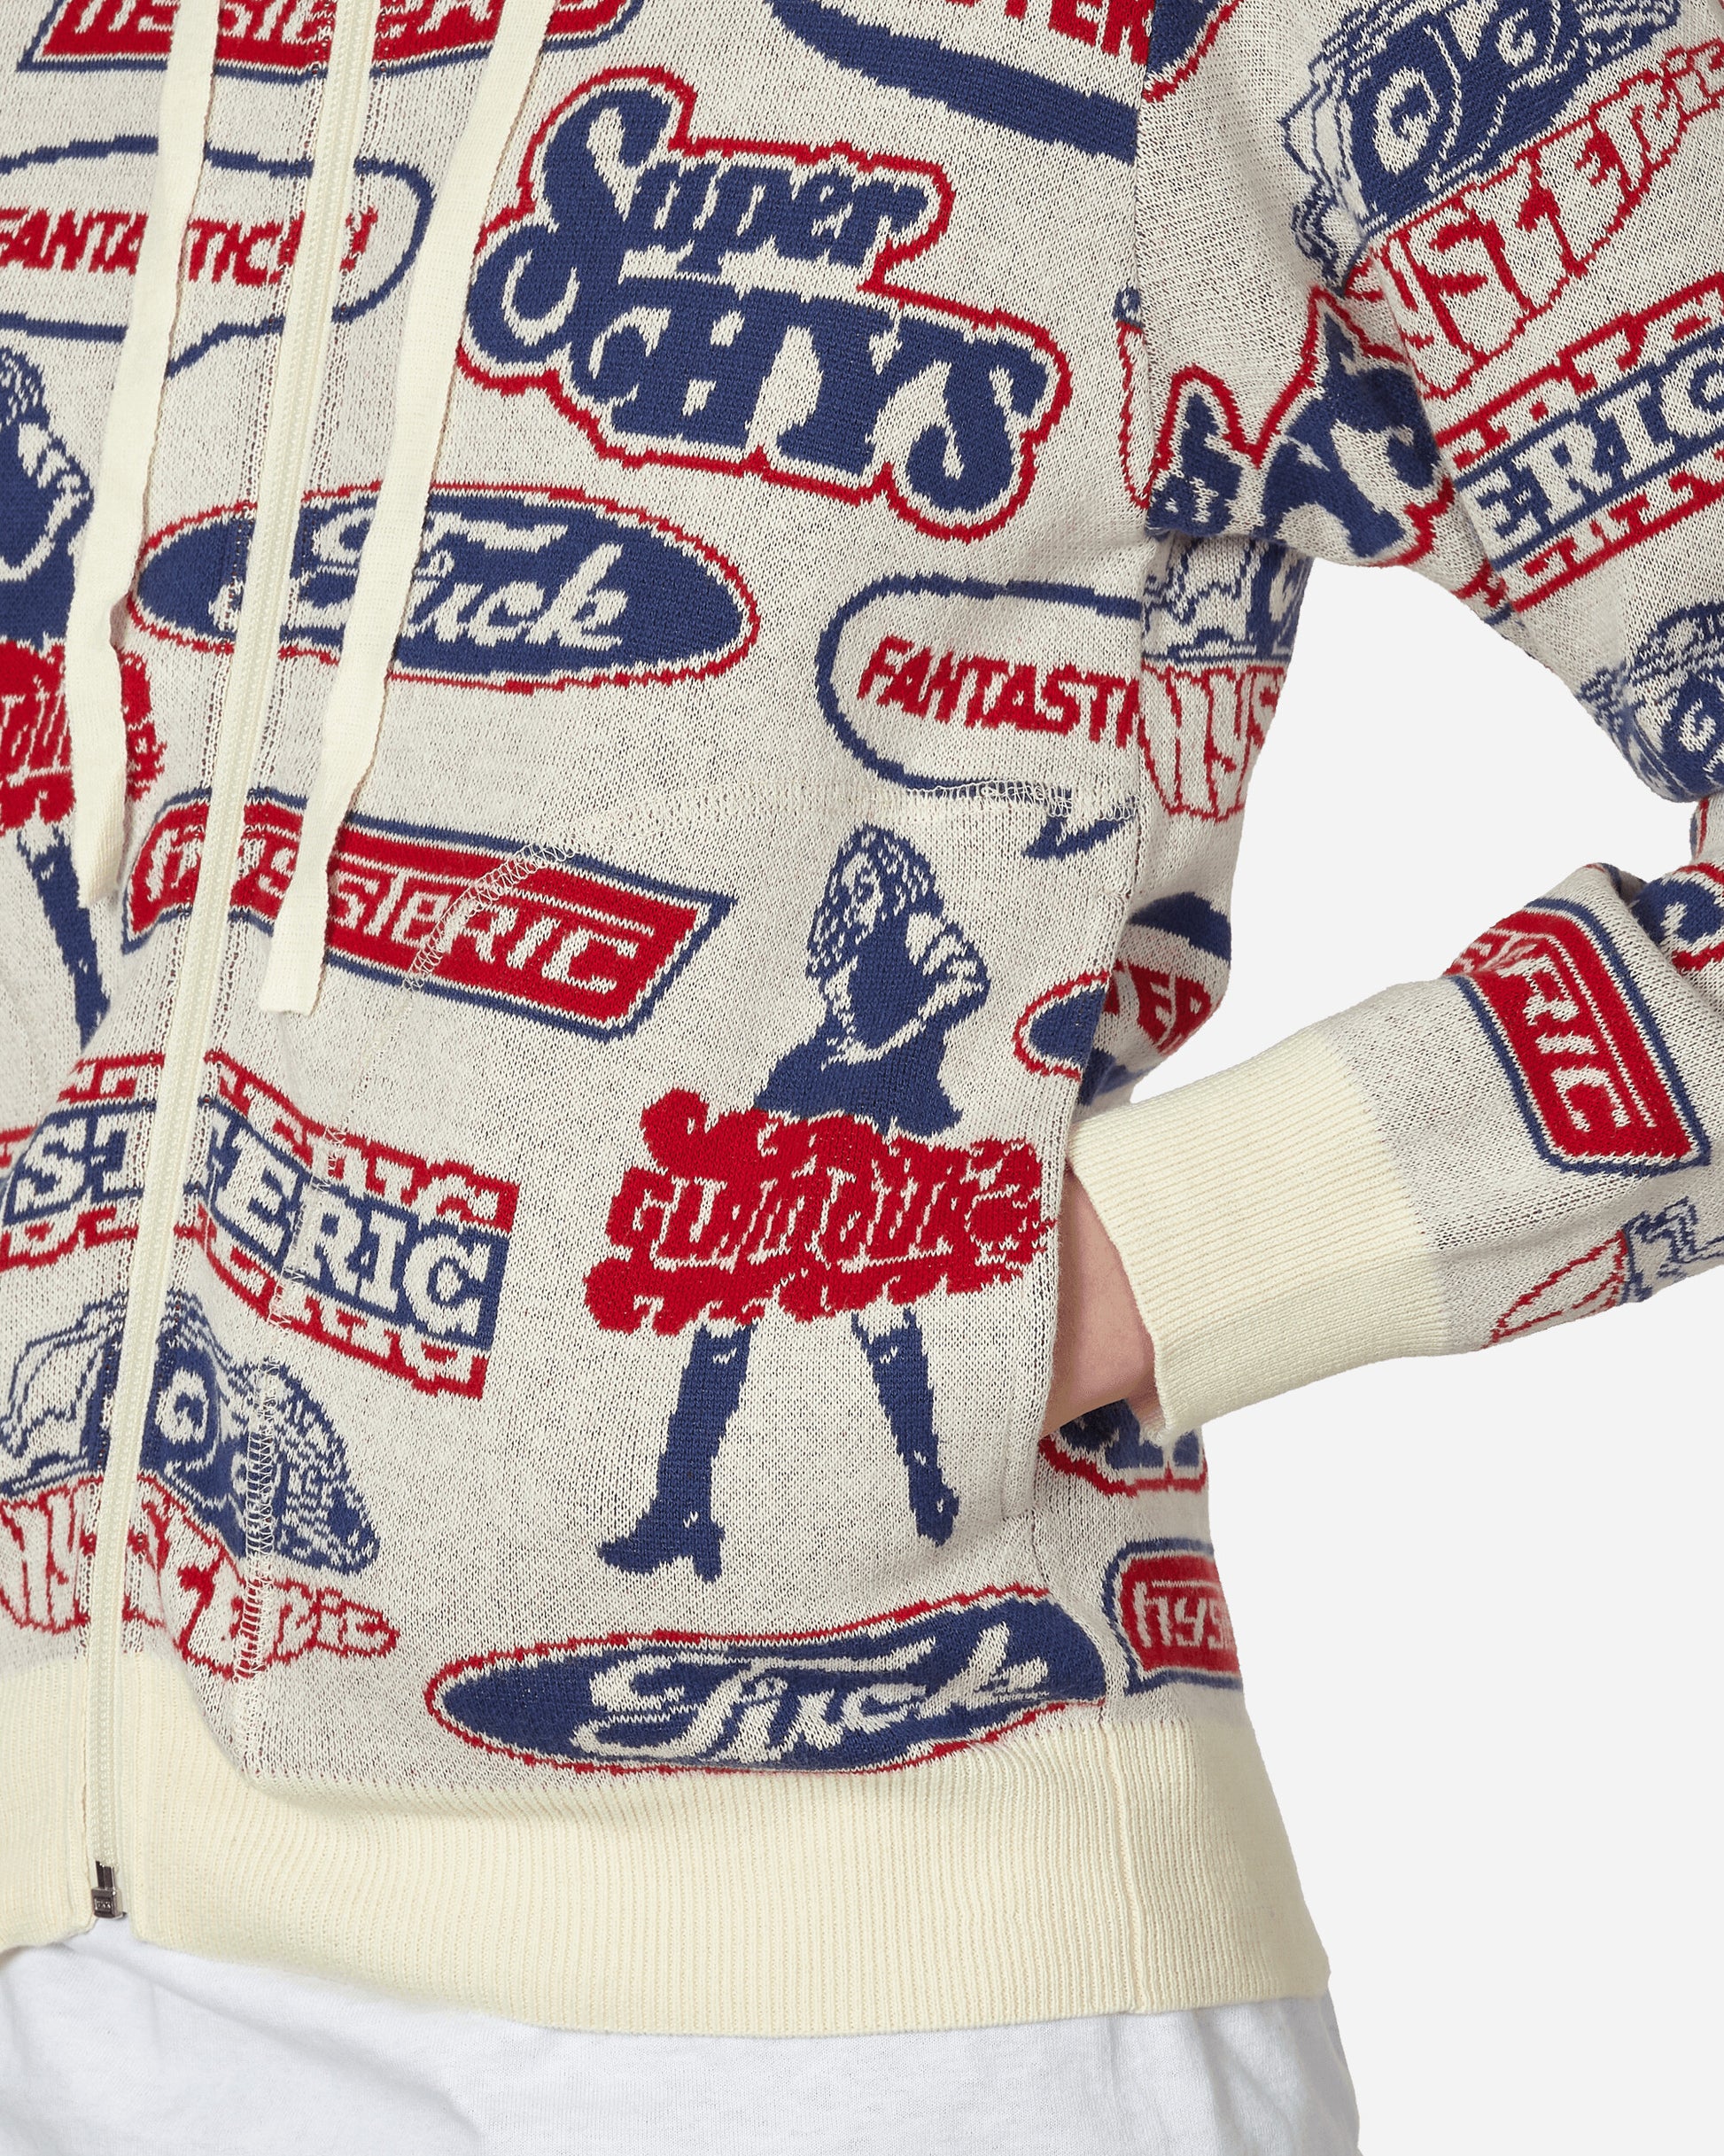 Hysteric Glamour Wmns Fantastic Box Dirty White    Sweatshirts Hoodies 01233ND039 A